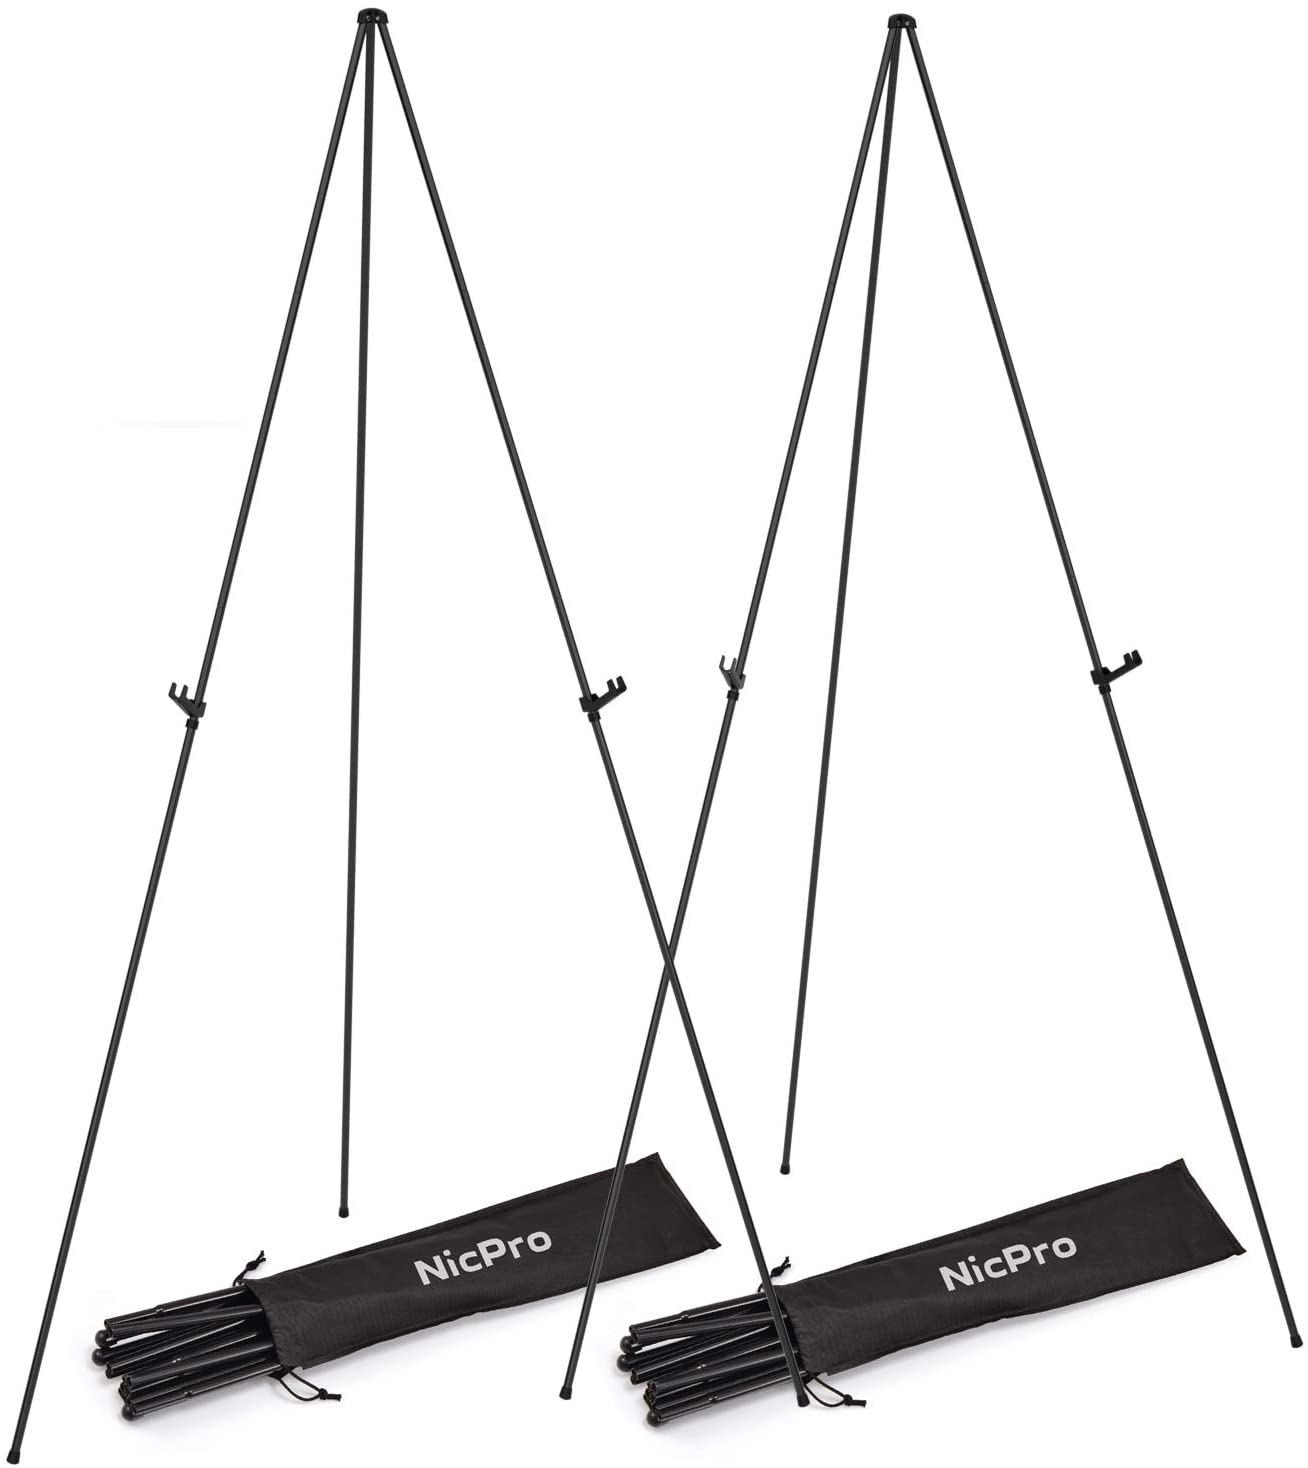  CertBuy 2 Pack Easel for Signs, 63 Inch Easels for Displaying  Picture, Black Easel Stand for Display Wedding Sign & Poster, Steel Folding  Easel for Wedding Painting Pictures, Arts & Crafts